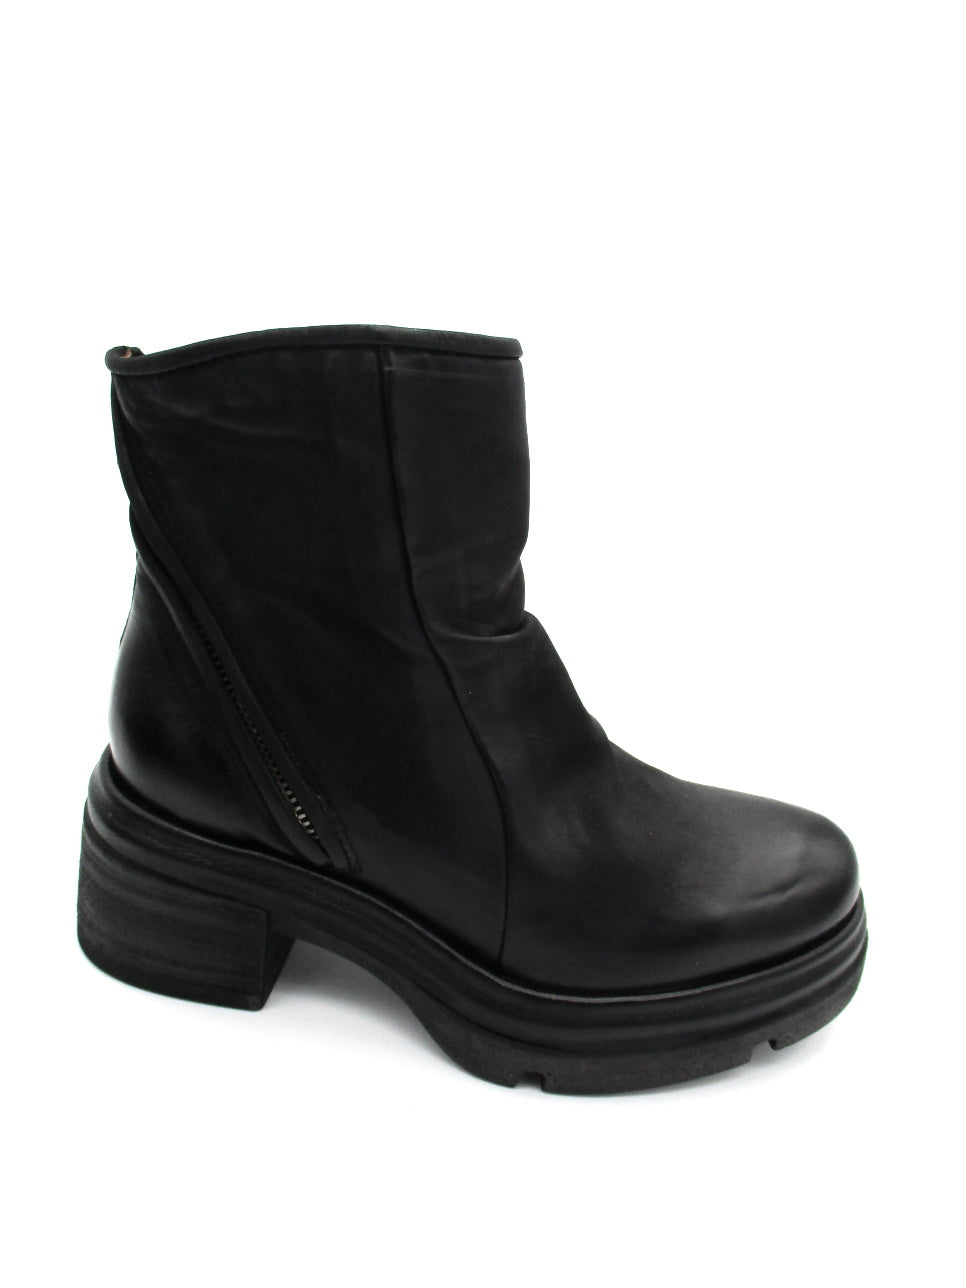 As98 A89208 Black women's leather ankle boot